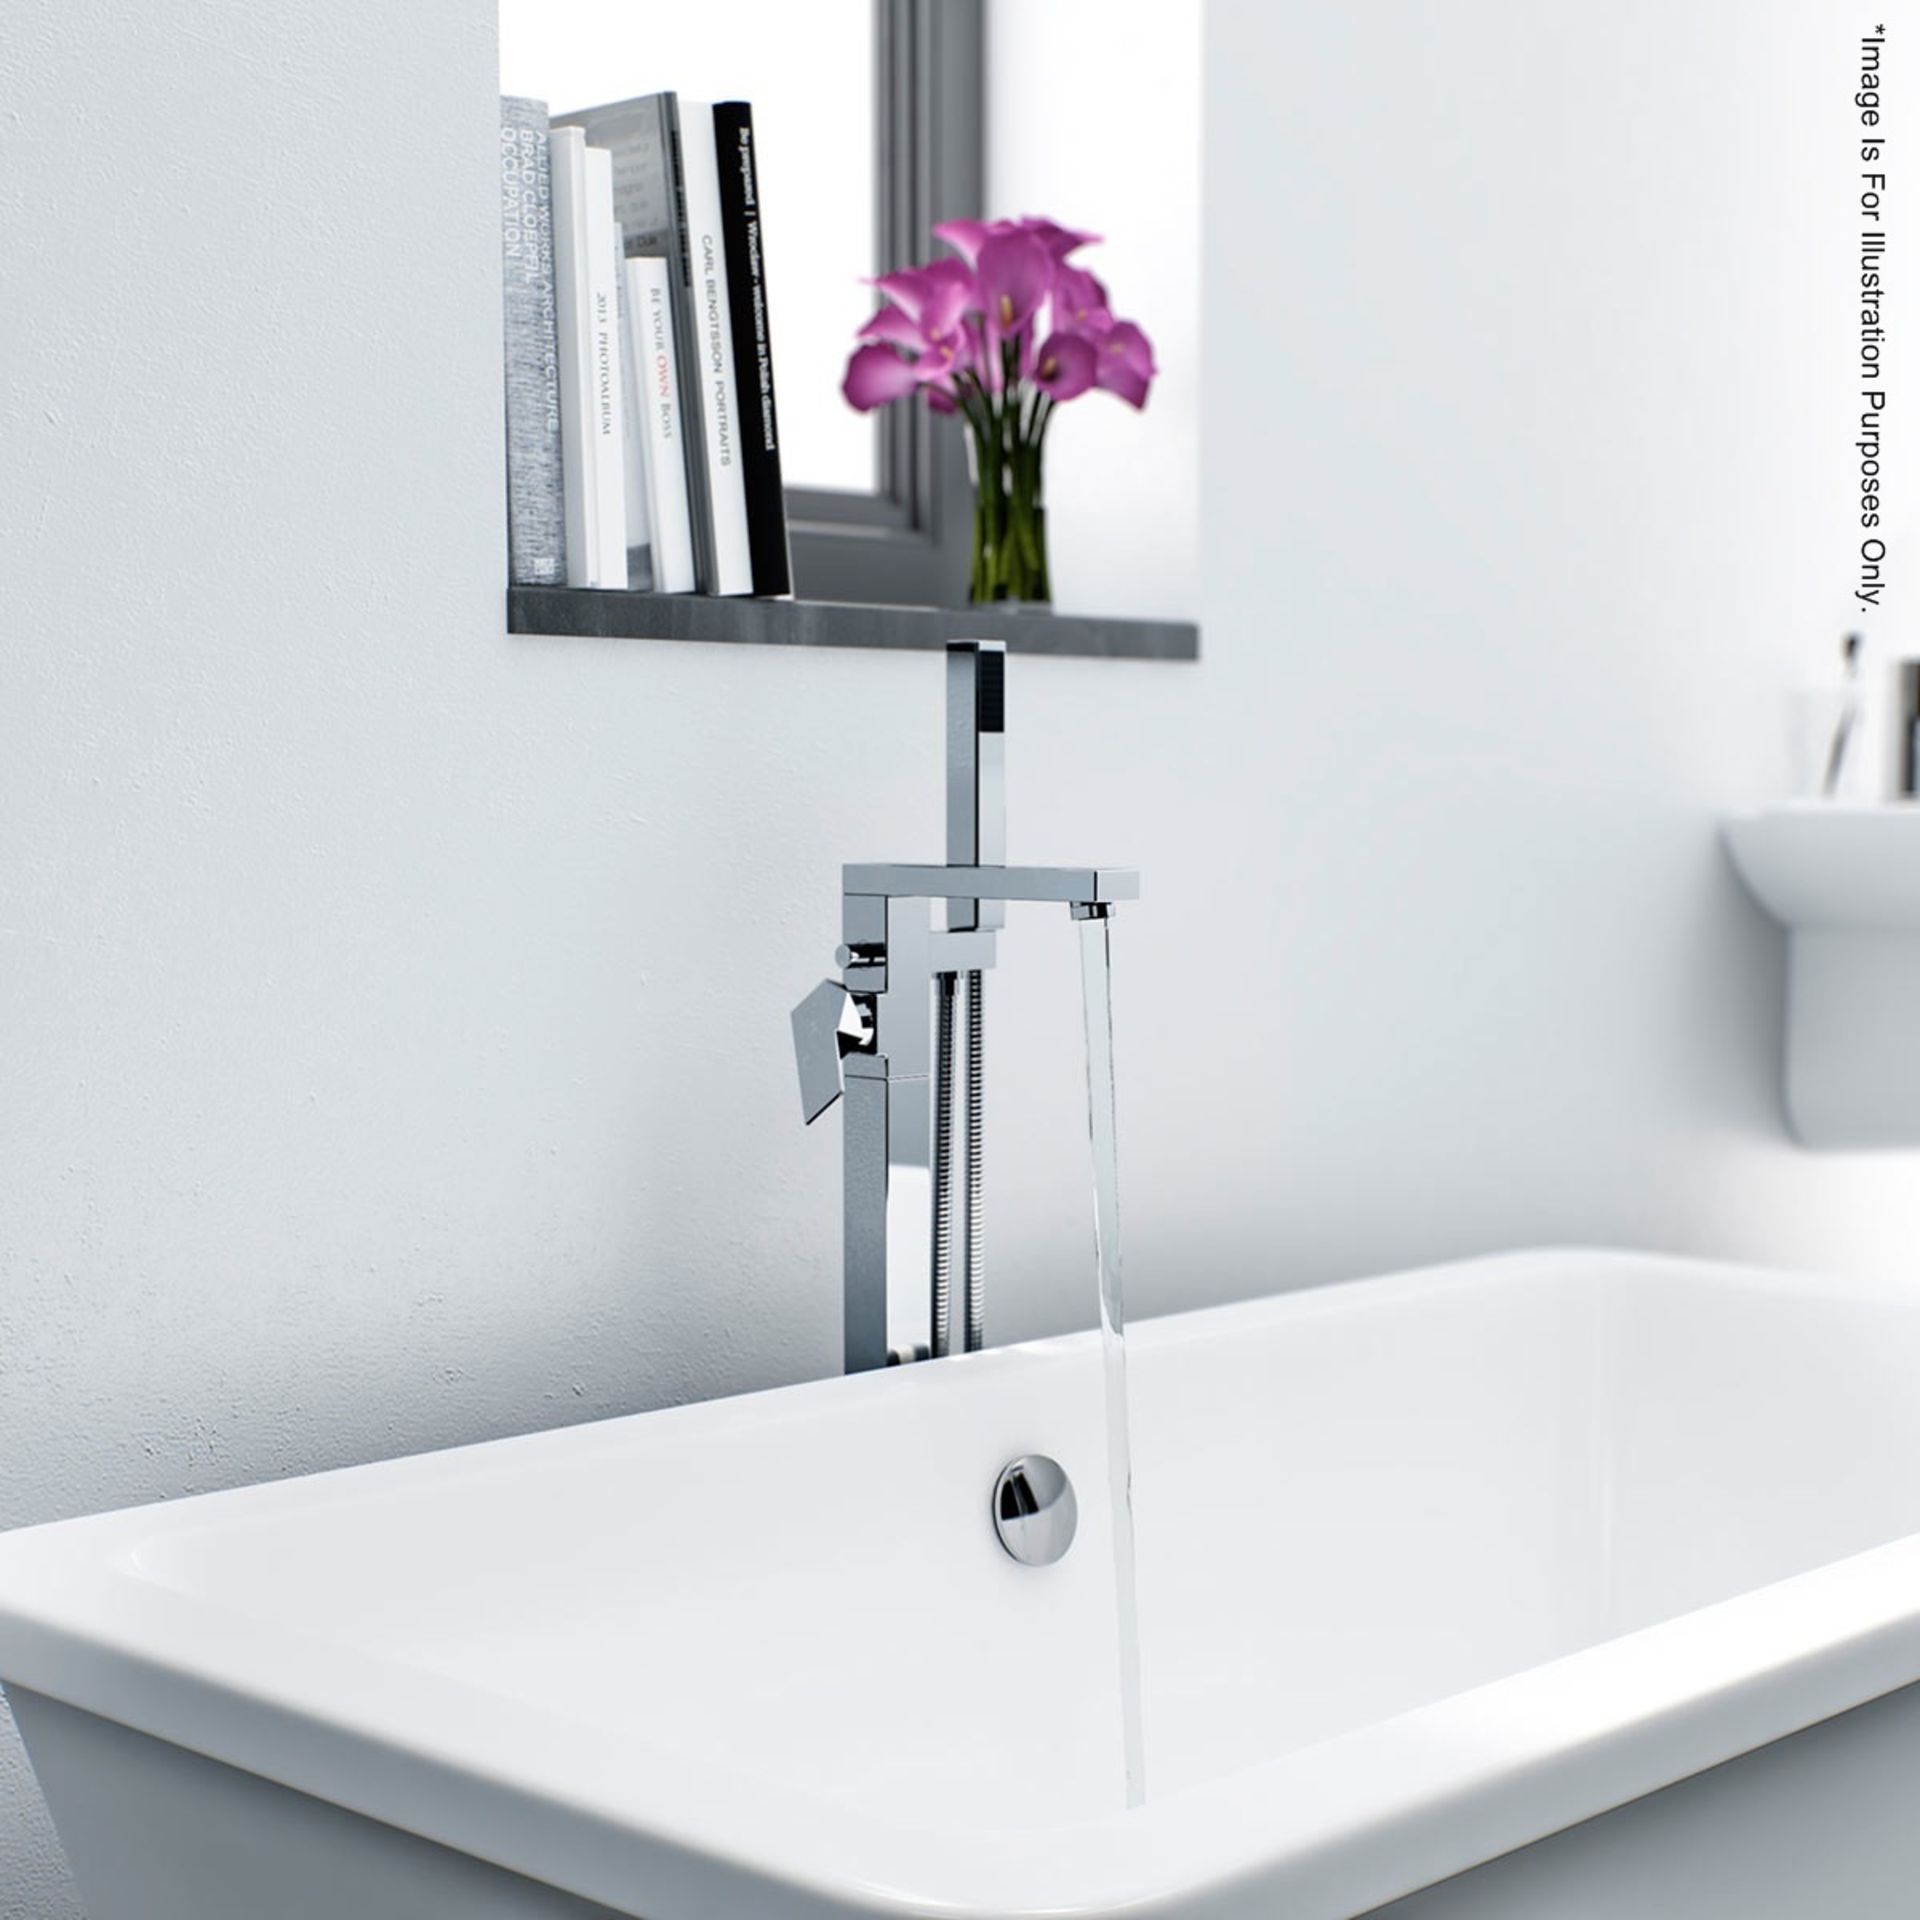 1 x Richmond Freestanding Bath Filler Tap In Chrome - Ref: MBI002 - CL190 - Unused Boxed Stock -